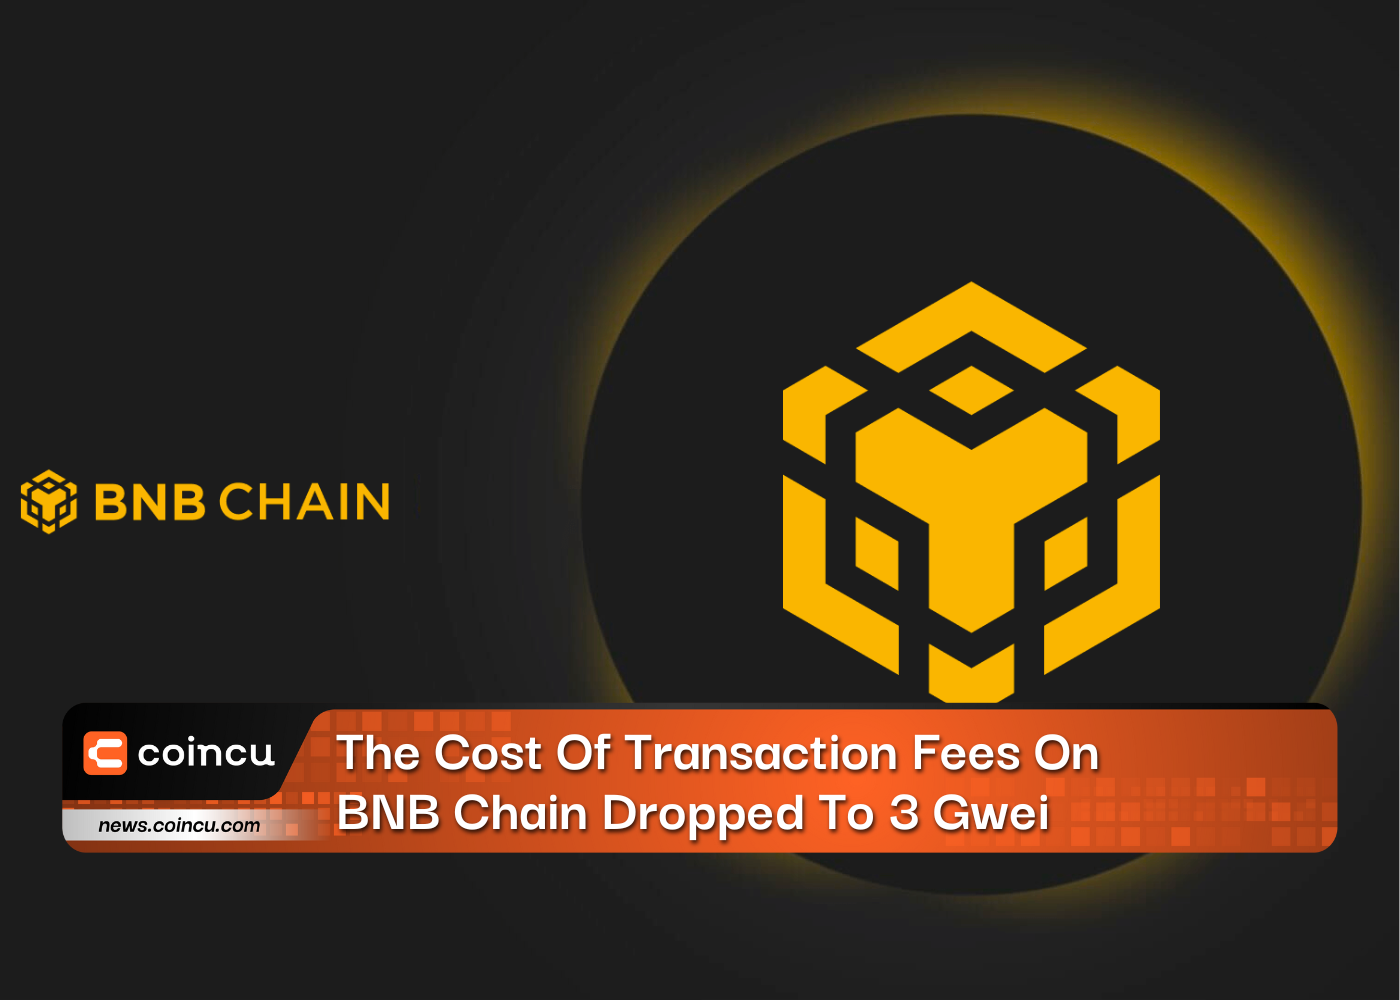 The Cost Of Transaction Fees On BNB Chain Dropped To 3 Gwei